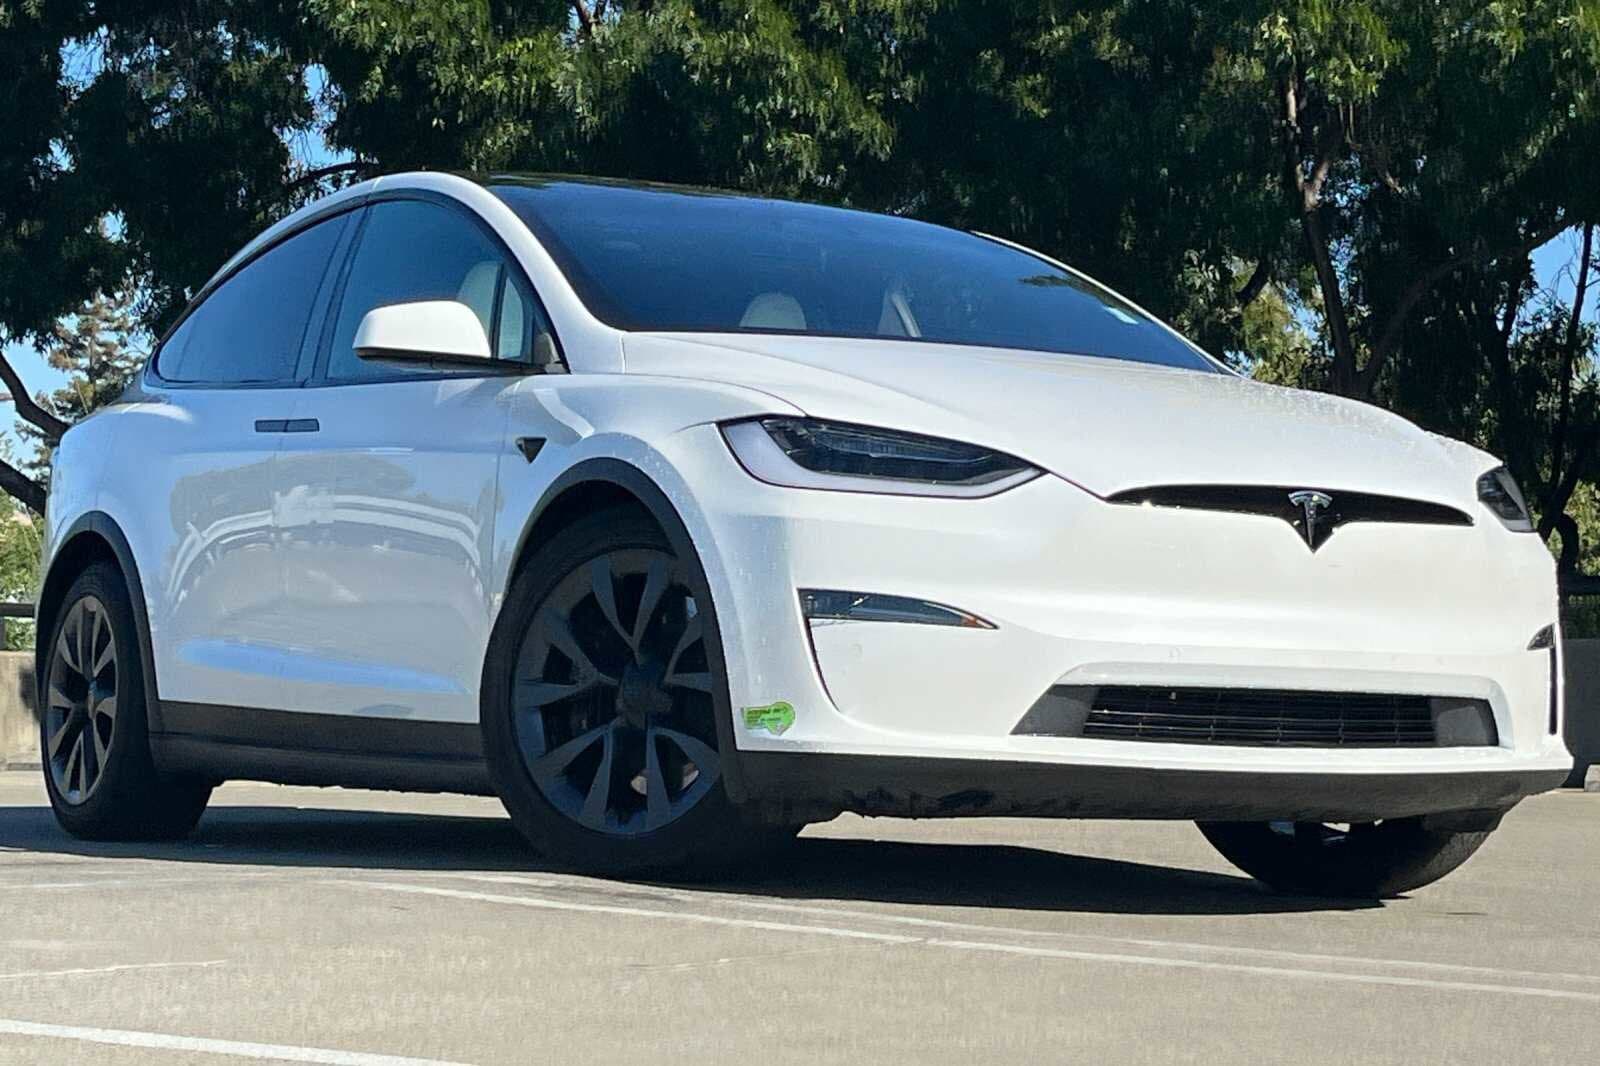 Used 2022 Tesla Model X Long Range with VIN 7SAXCAE54NF355250 for sale in Walnut Creek, CA